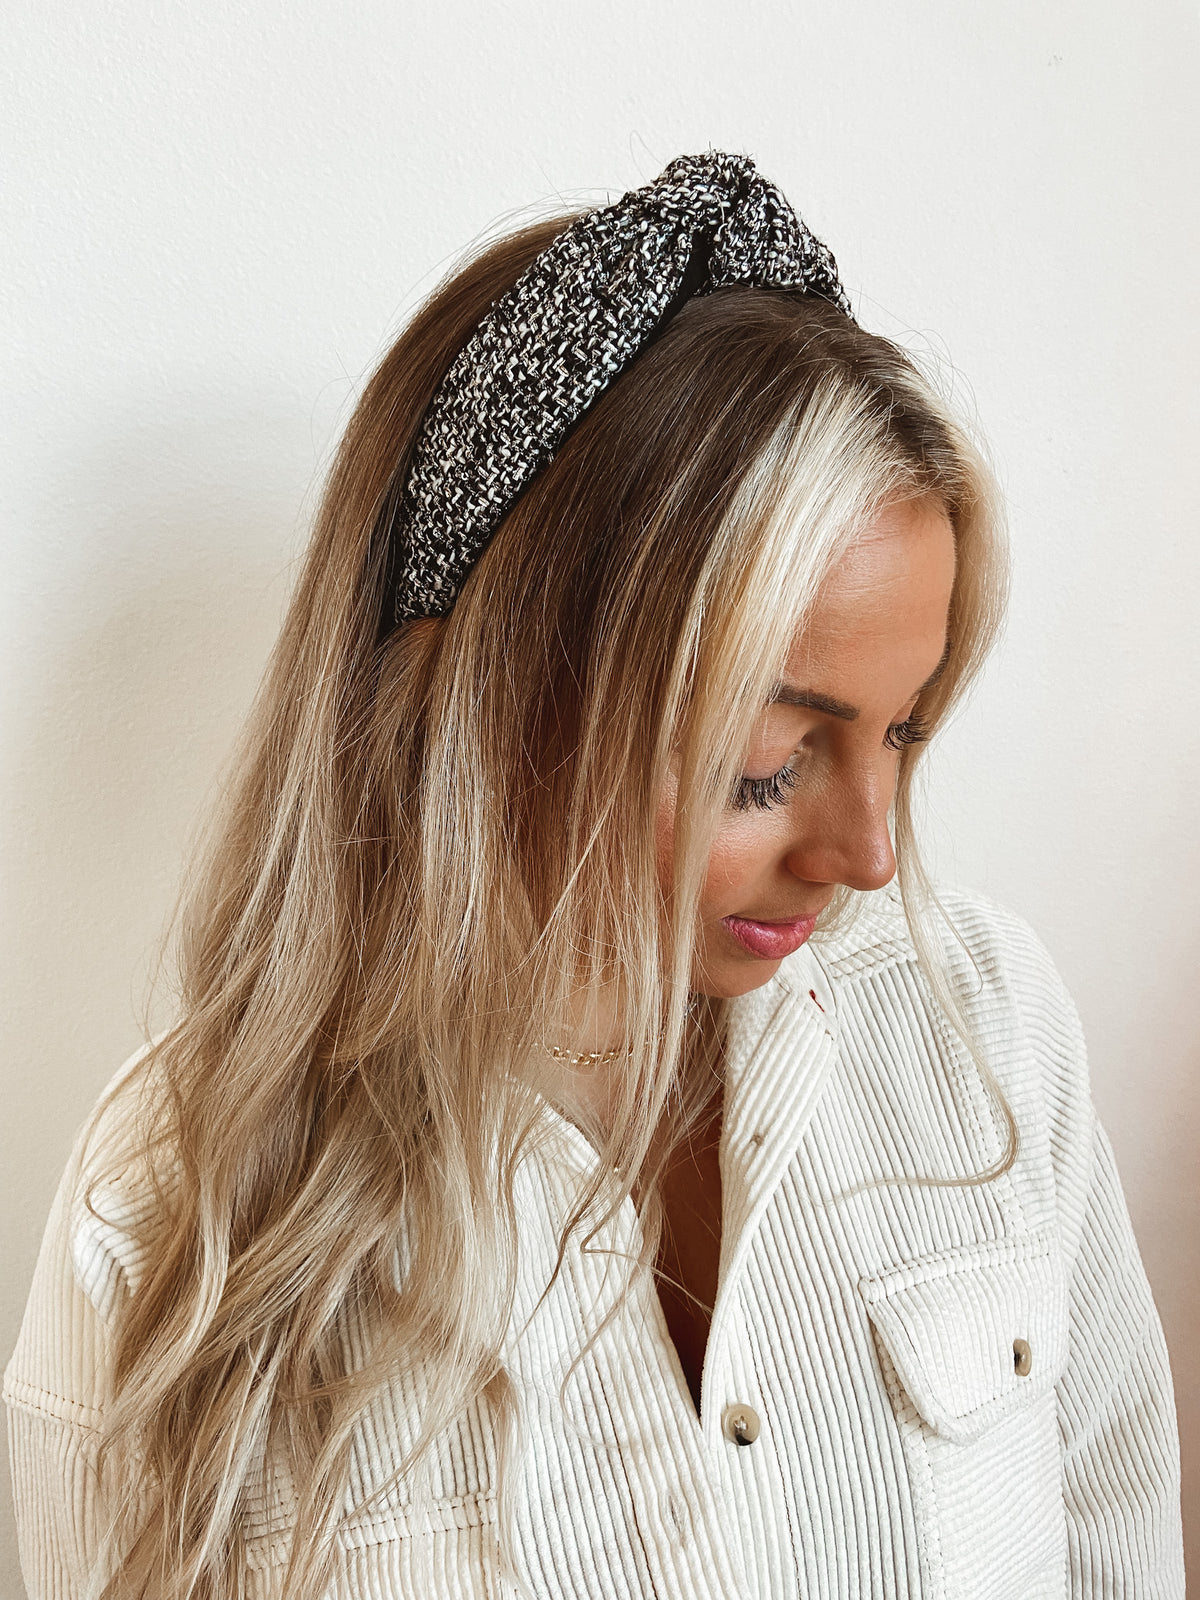 20 Hairstyles with Headbands for Casual and Festive Looks